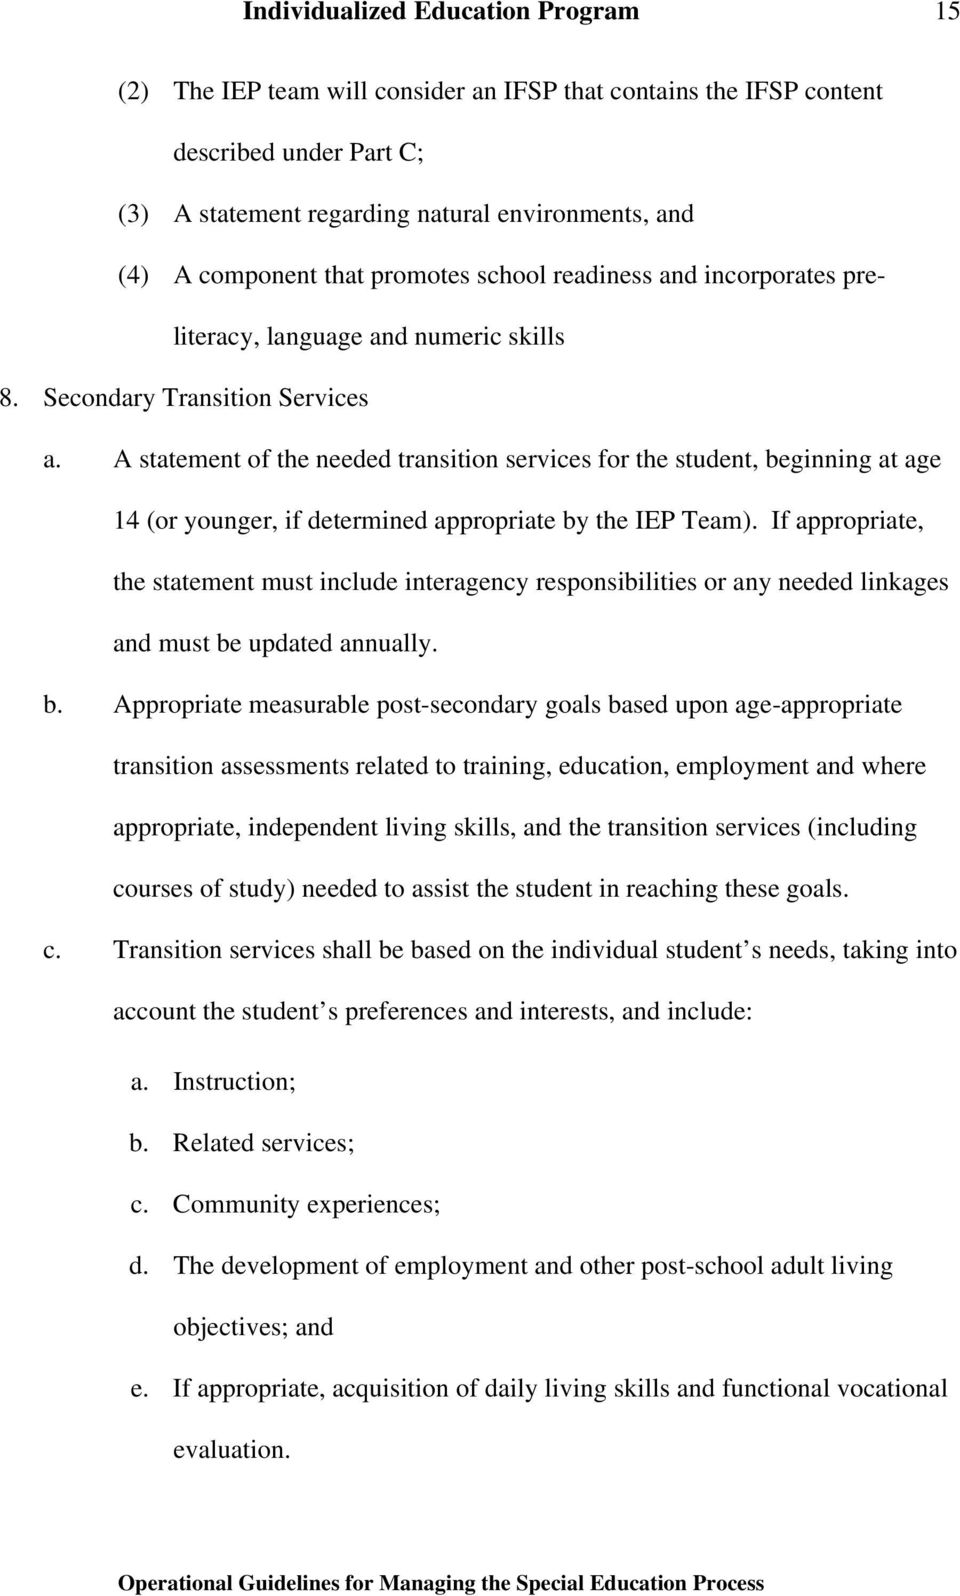 A statement of the needed transition services for the student, beginning at age 14 (or younger, if determined appropriate by the IEP Team).